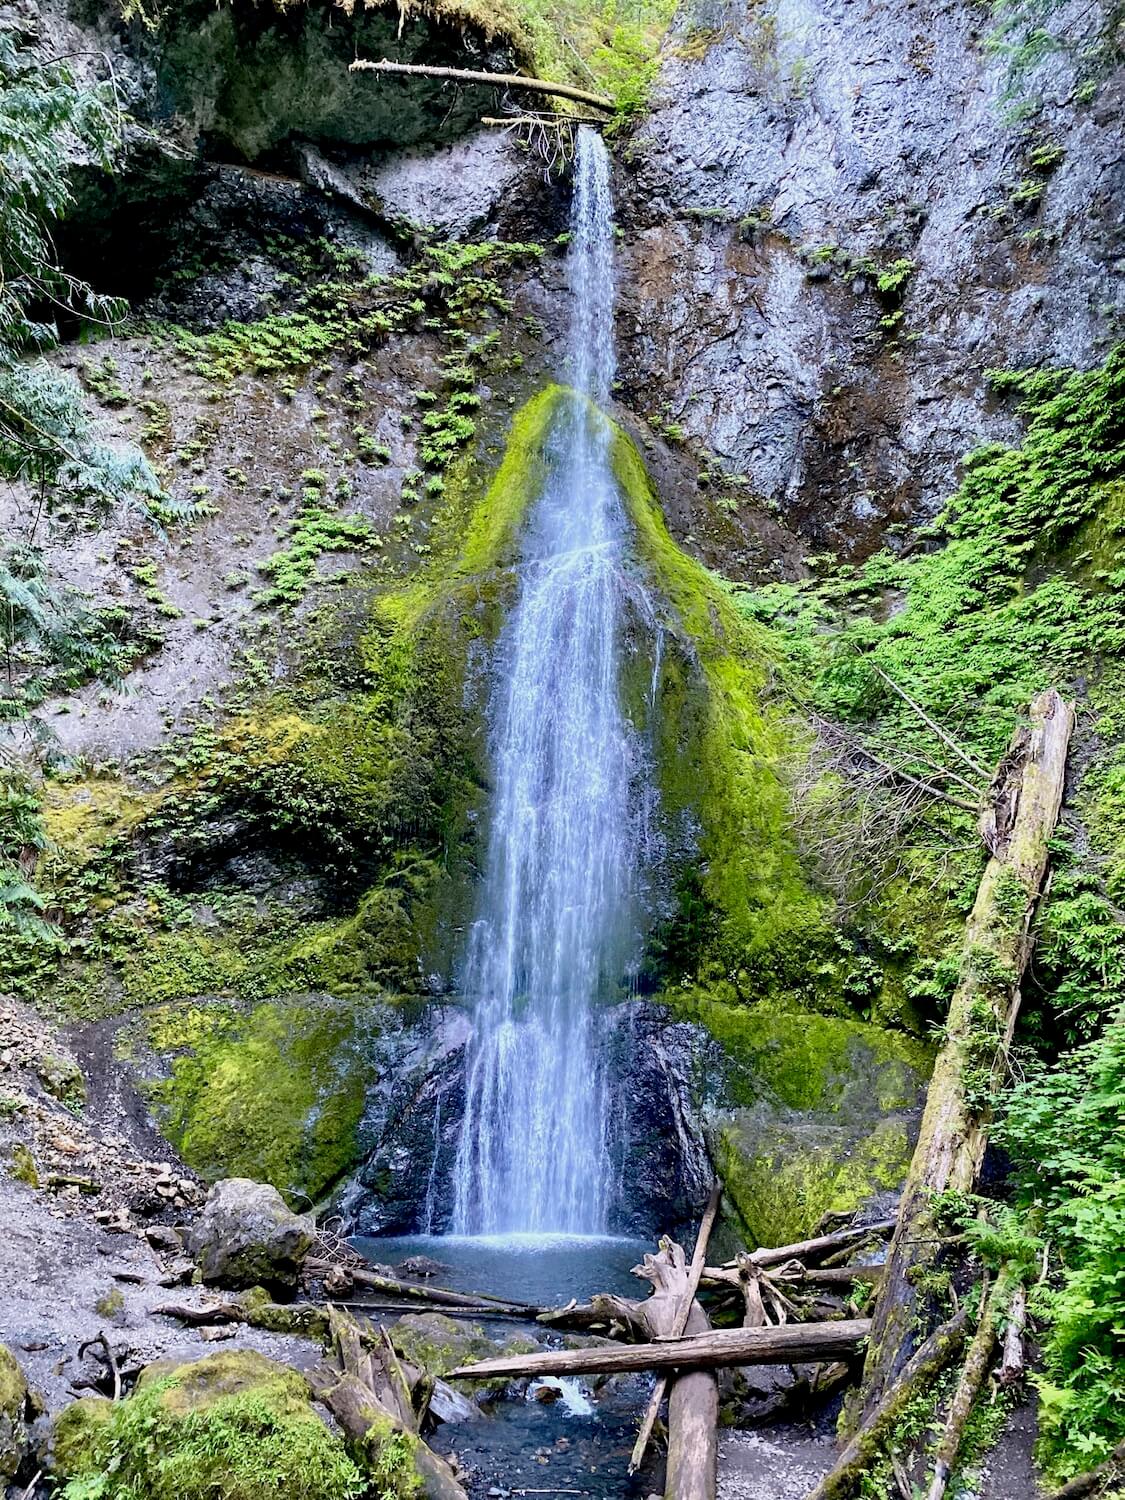 The Olympic National Park is full of inspiration, including the majestic Marymere Falls. The water begins from a creek up on the cliff and fans out to cascade down a steep moss lined face of rock. The pool of water at the bottom collects mist around fallen logs and smaller green ground brush.